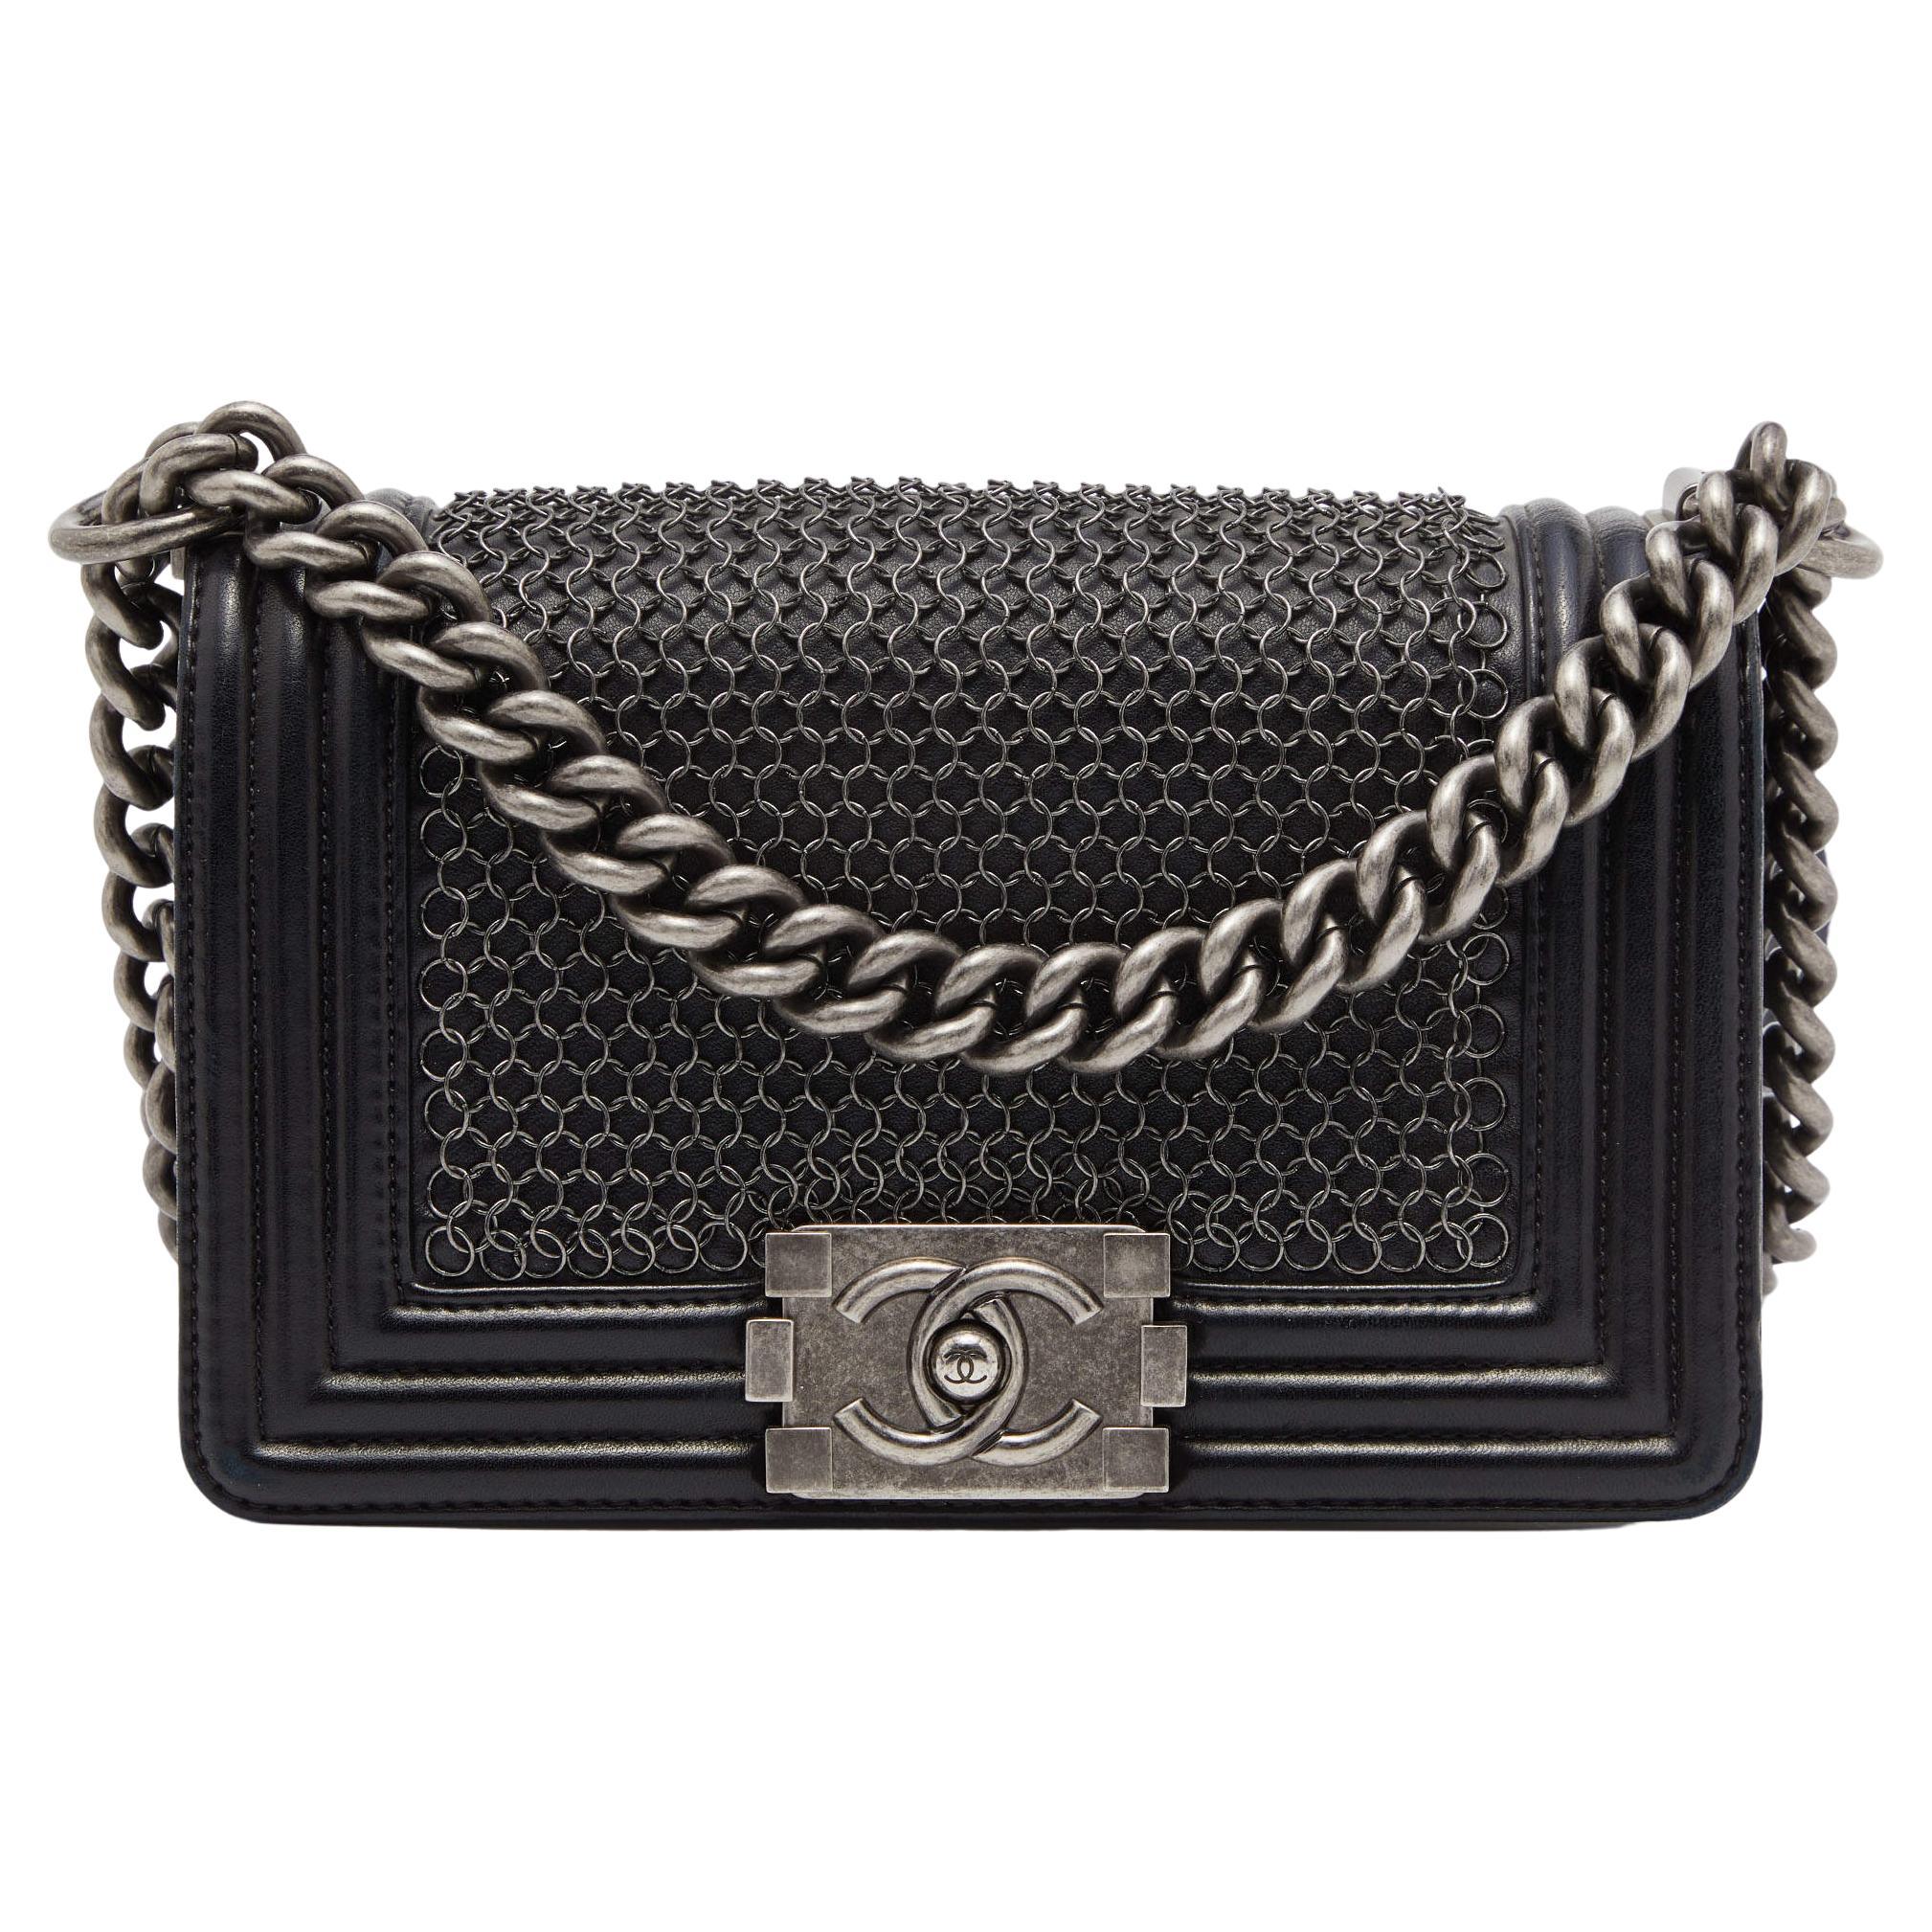 Chanel Black Leather Small Chainmail Boy Flap Bag